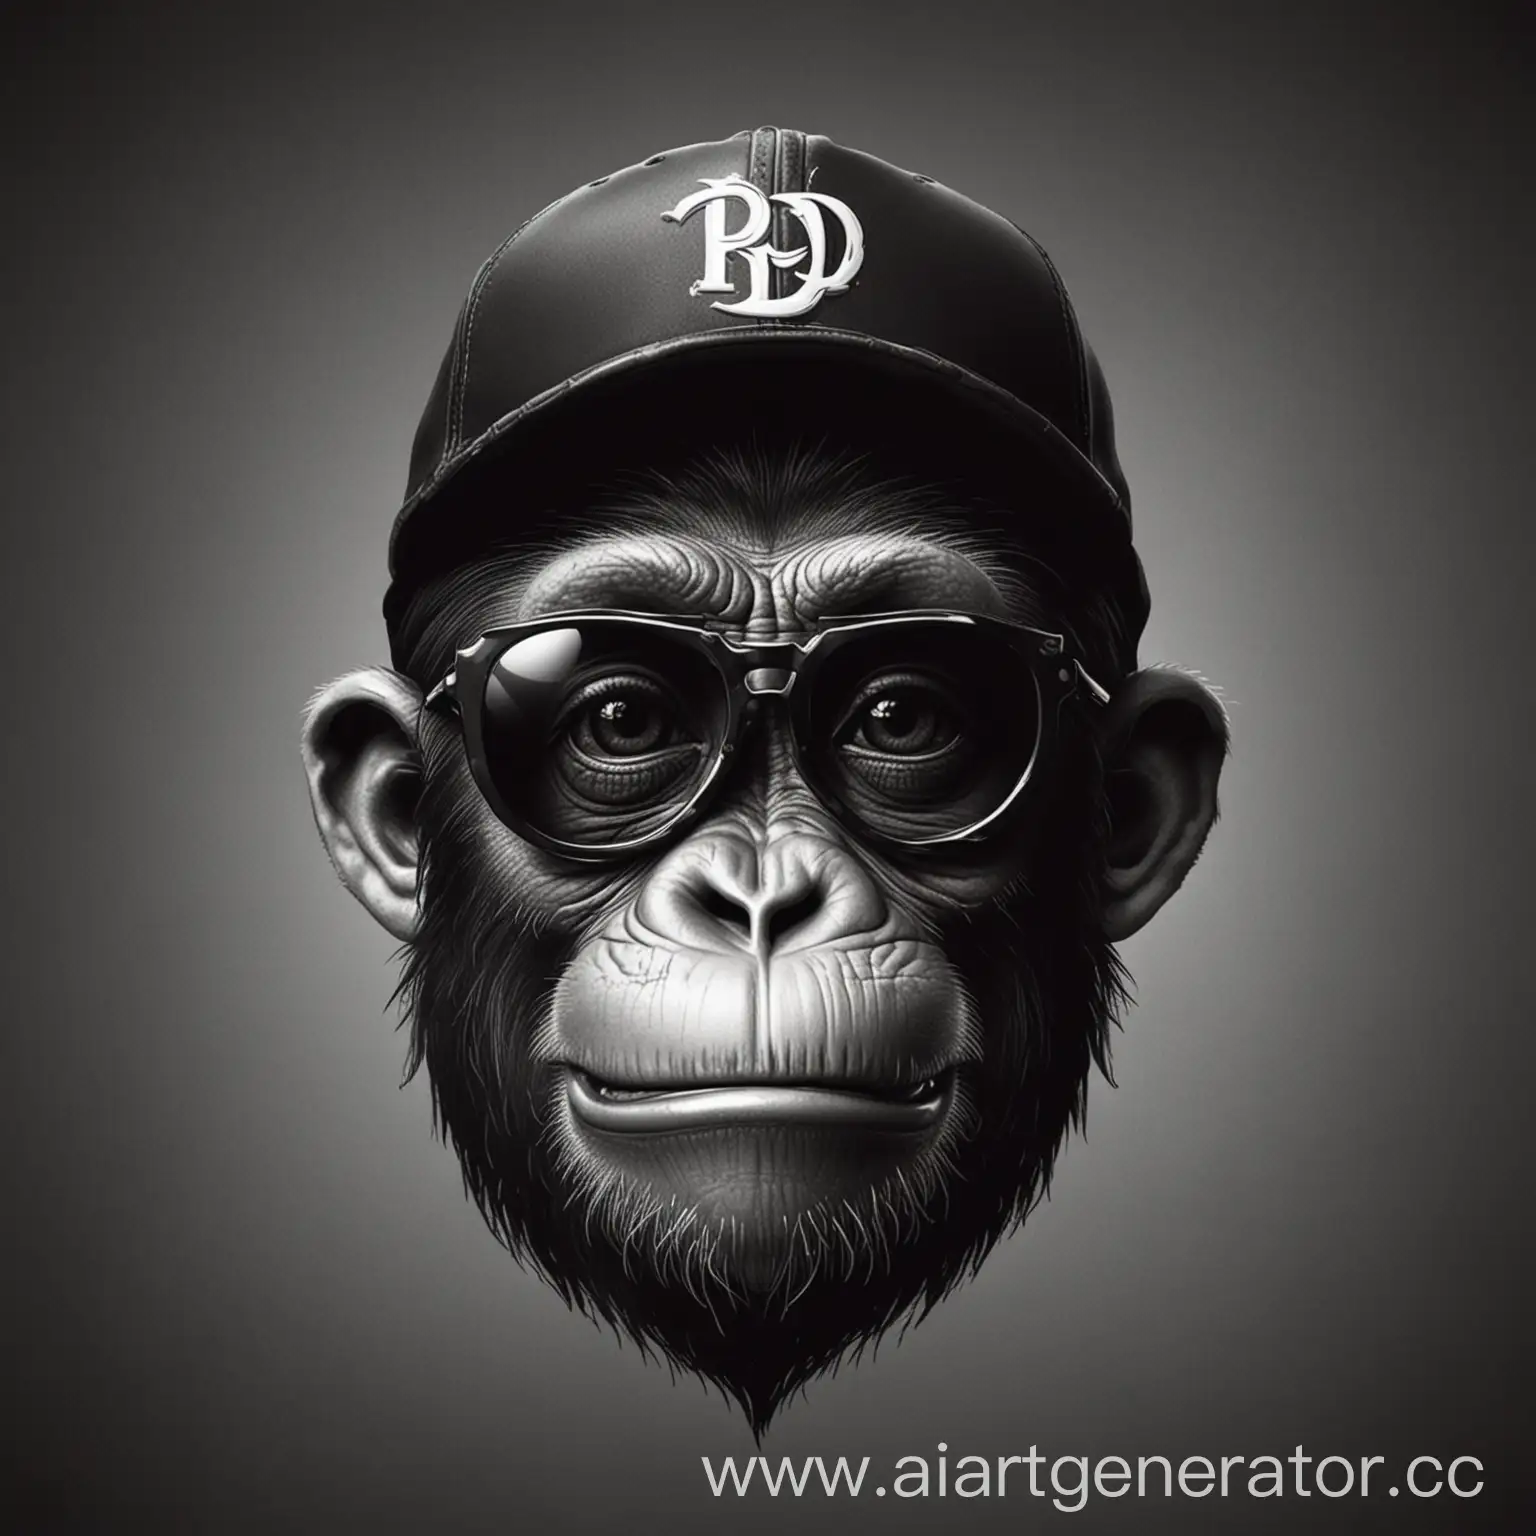 Make a logo with a bad boy monkey face, extremely stylish, wearing a cap written ON THE GO, sunglasses, make it black and white, like vector design, not real photo